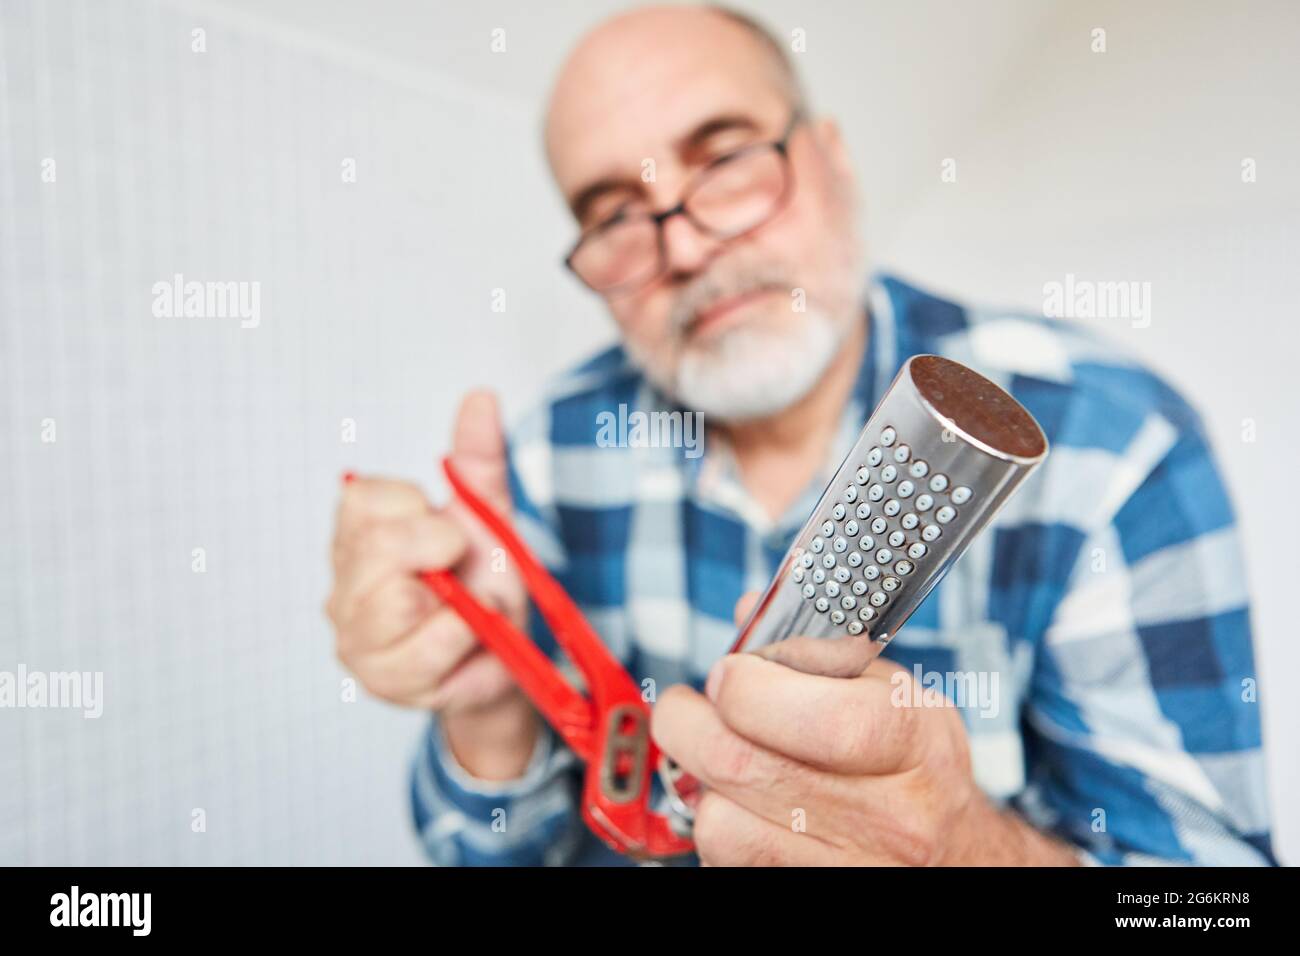 A plumber as a craftsman or do-it-yourselfer repairs shower head with a pipe wrench Stock Photo